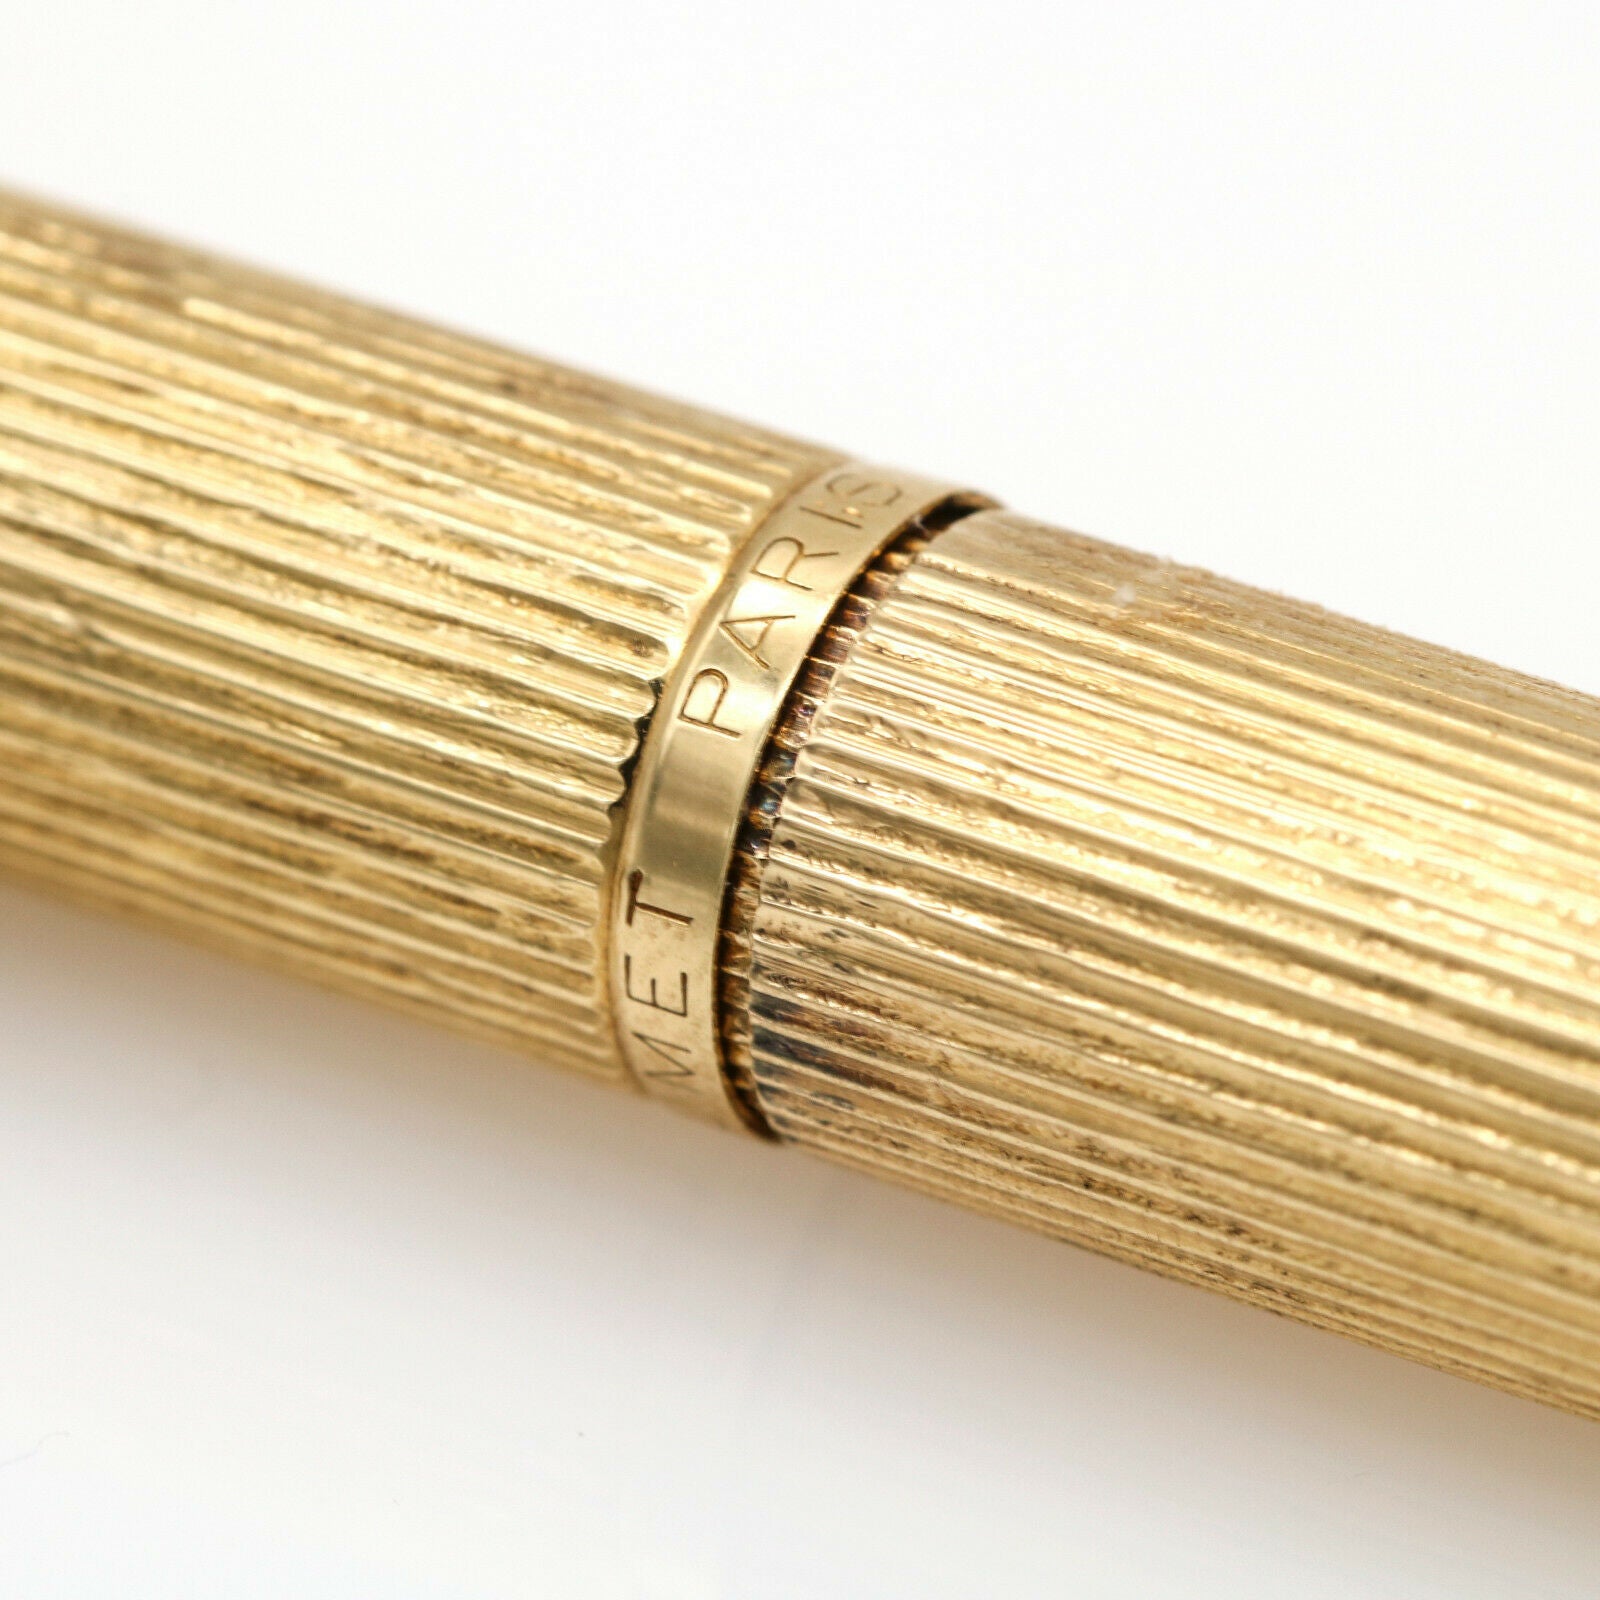 CHAUMET Textured 18k Yellow Gold Fountain Pen with Diamonds 1.20 cttw